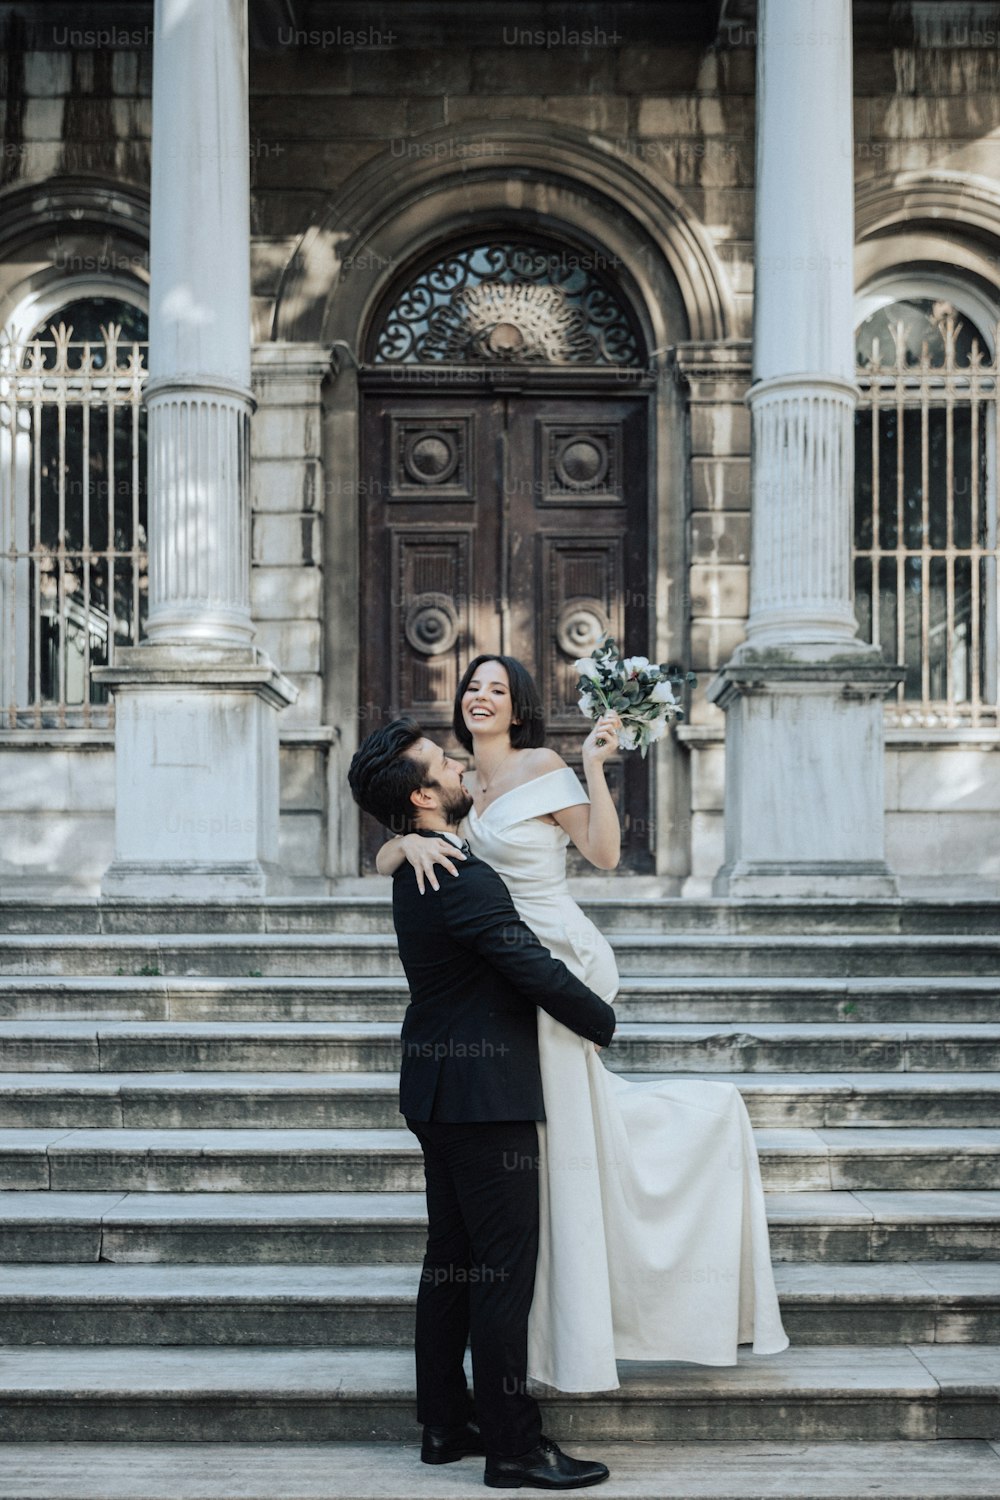 a bride and groom standing on the steps of a building